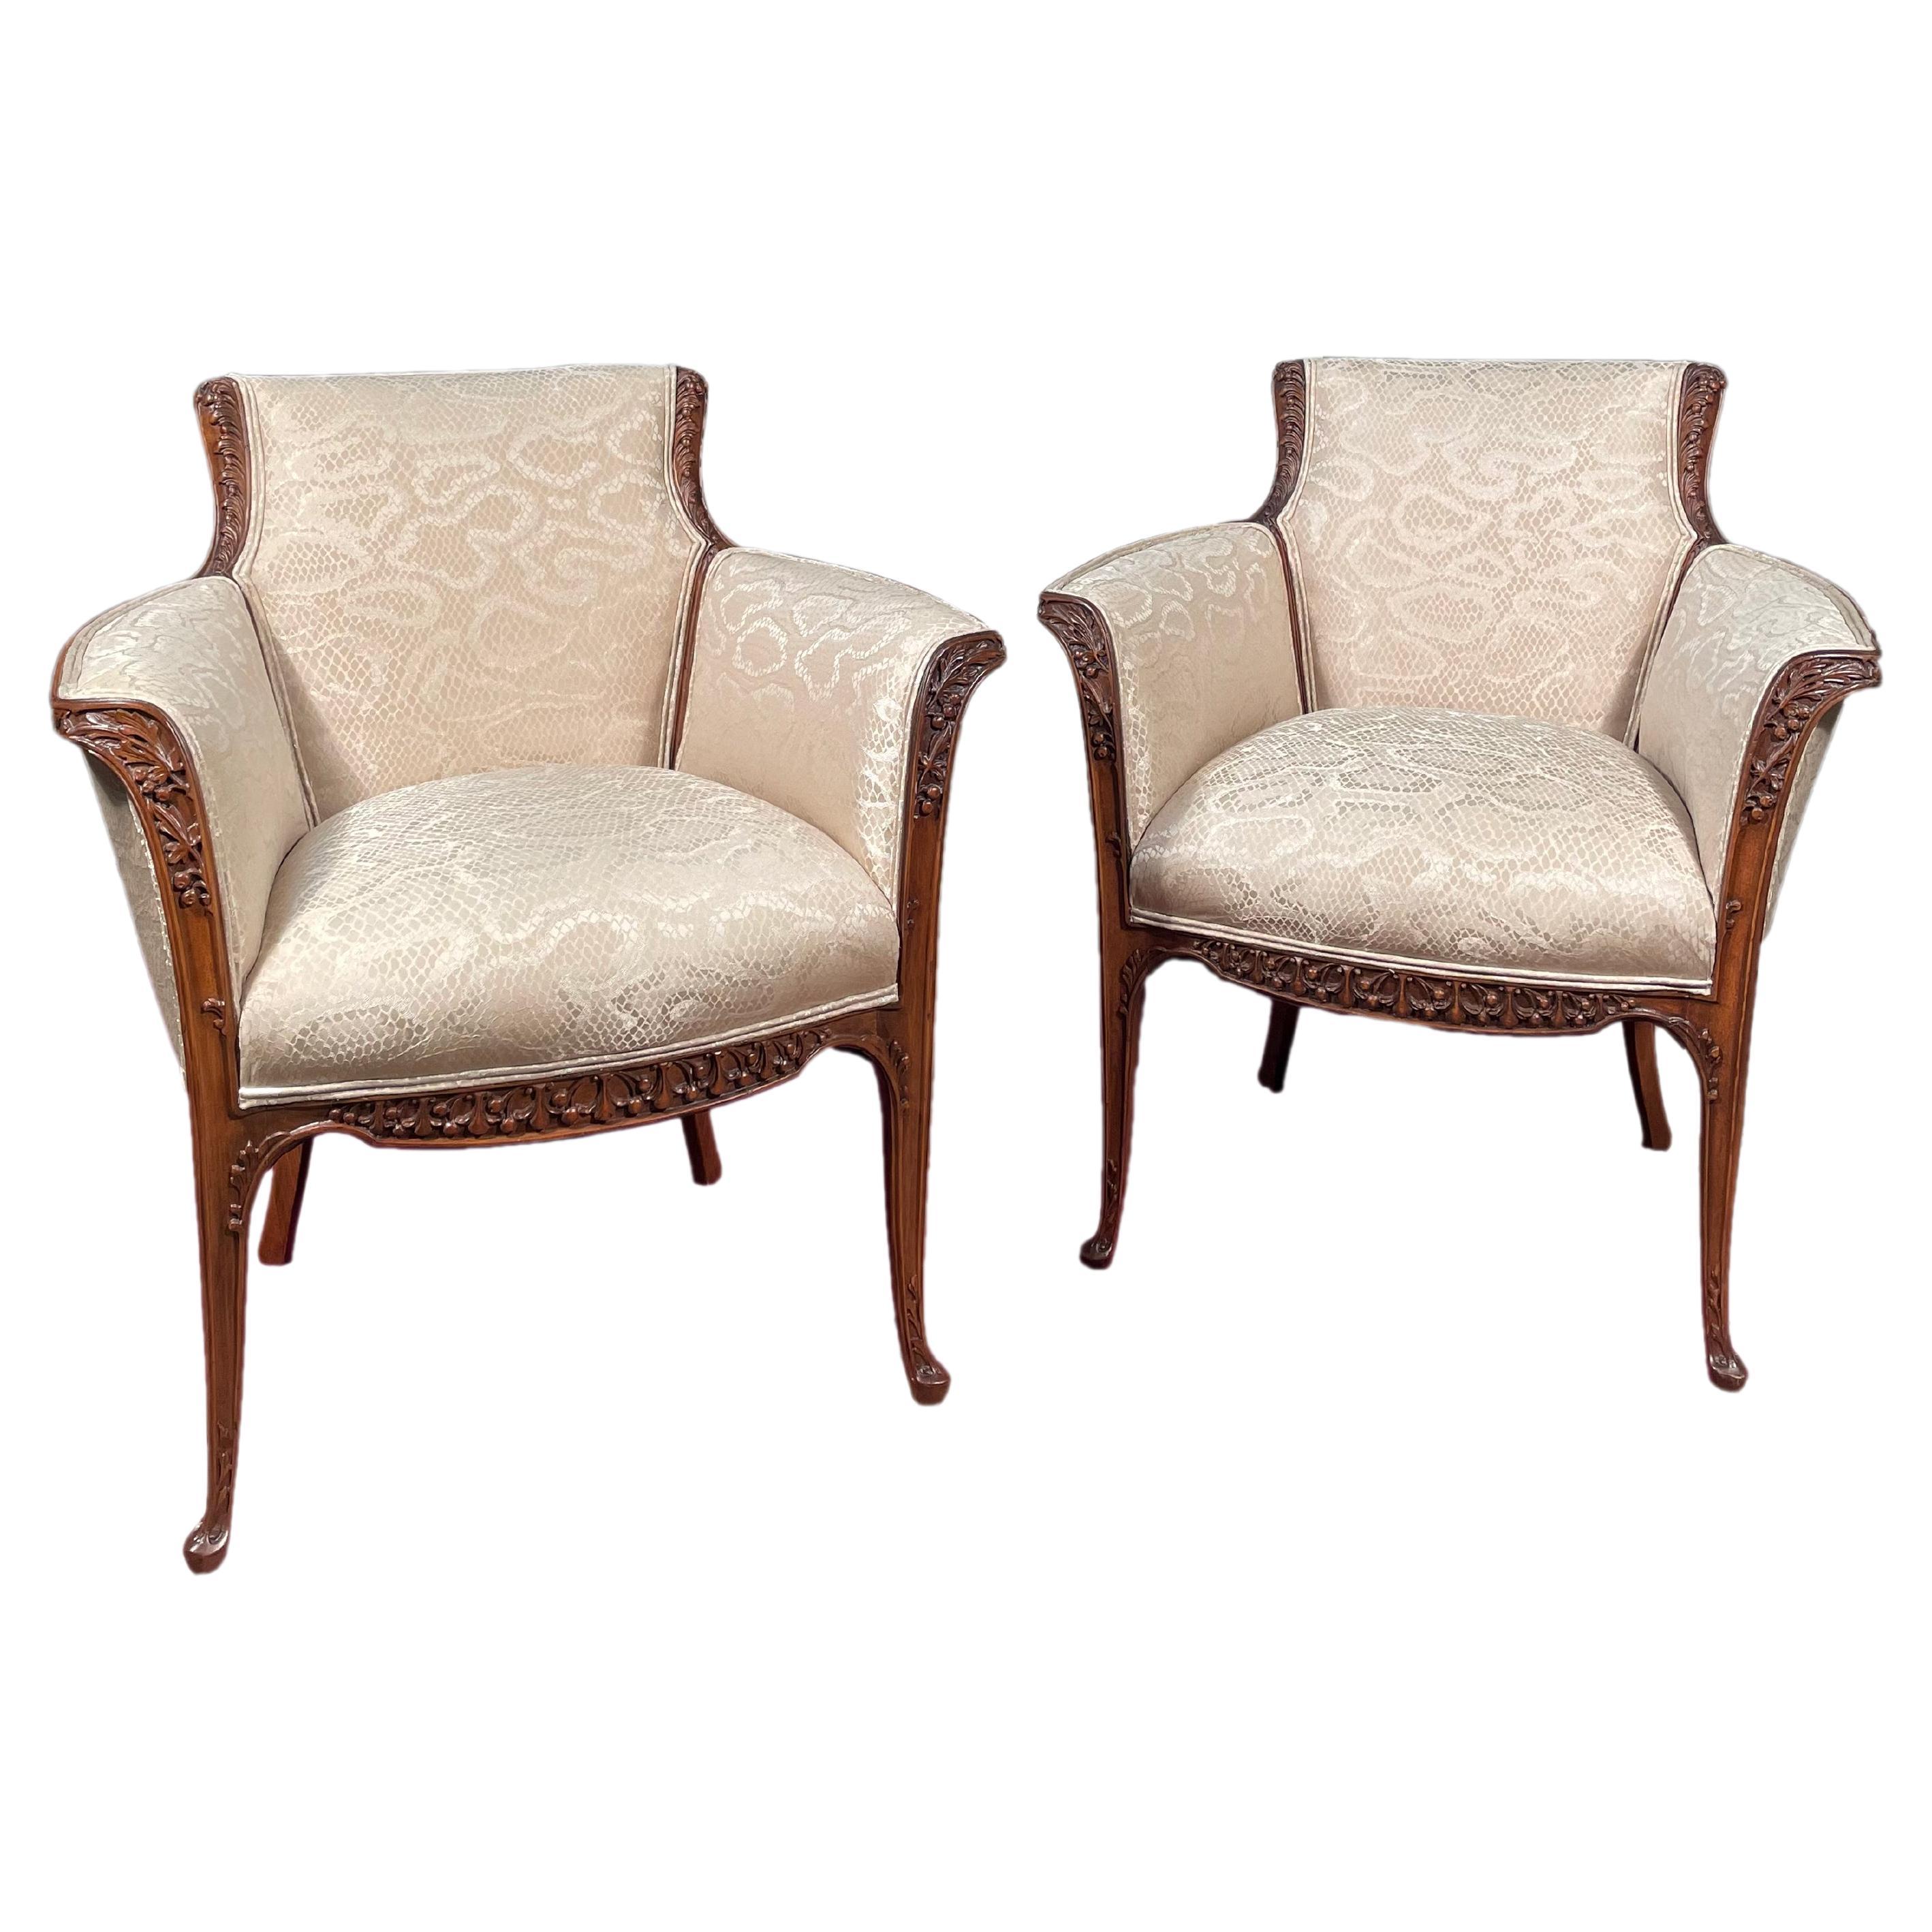 Pair of French Art Nouveau Armchairs by, Louis Majorelle Arm Chairs 